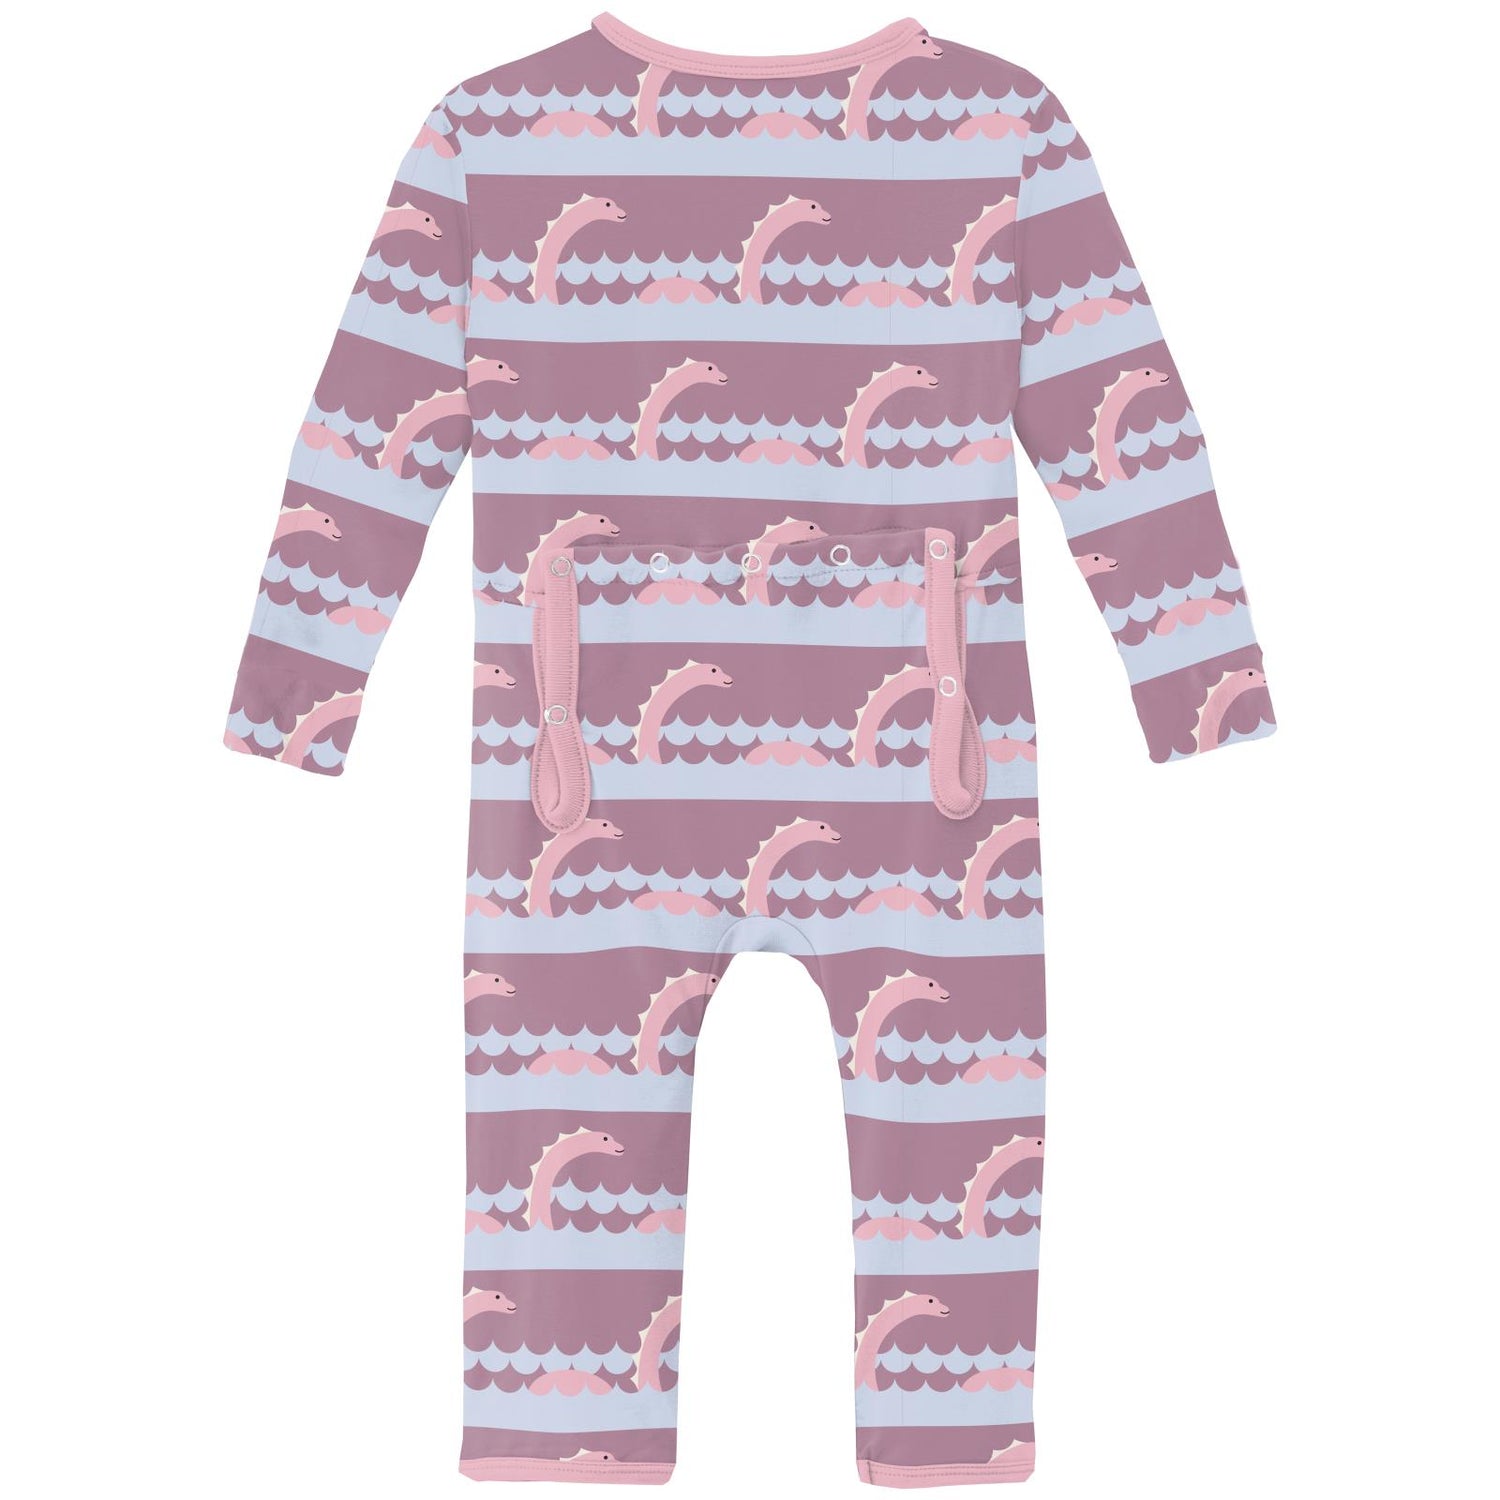 Print Coverall with 2 Way Zipper in Pegasus Sea Monster